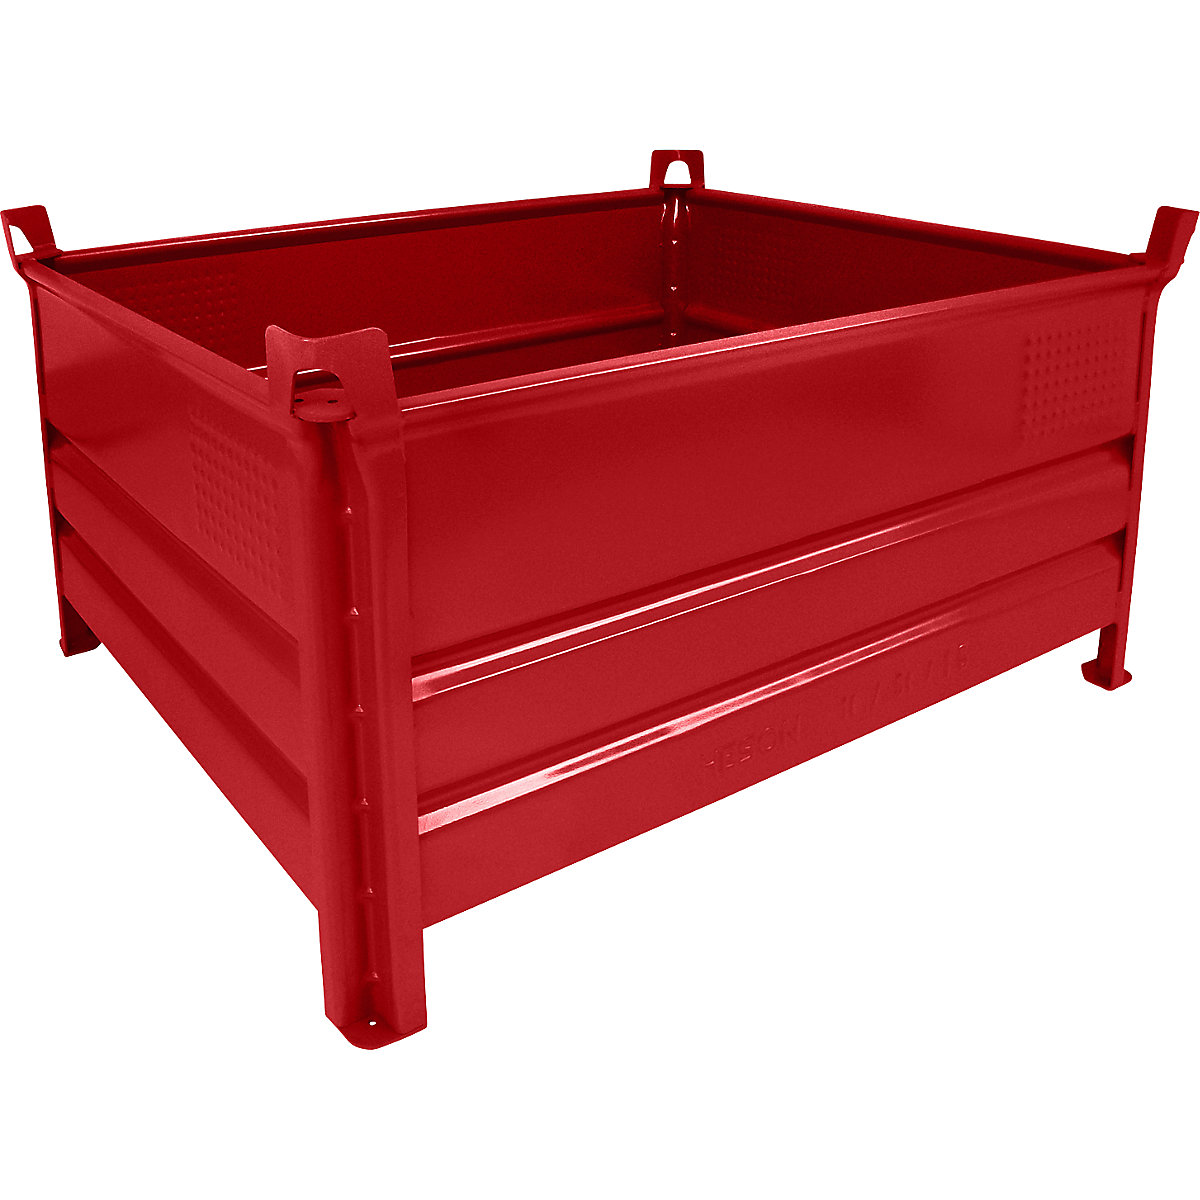 Solid panel box pallet – Heson, WxL 1000 x 1200 mm, max. load 1000 kg, red, 1+ items-6